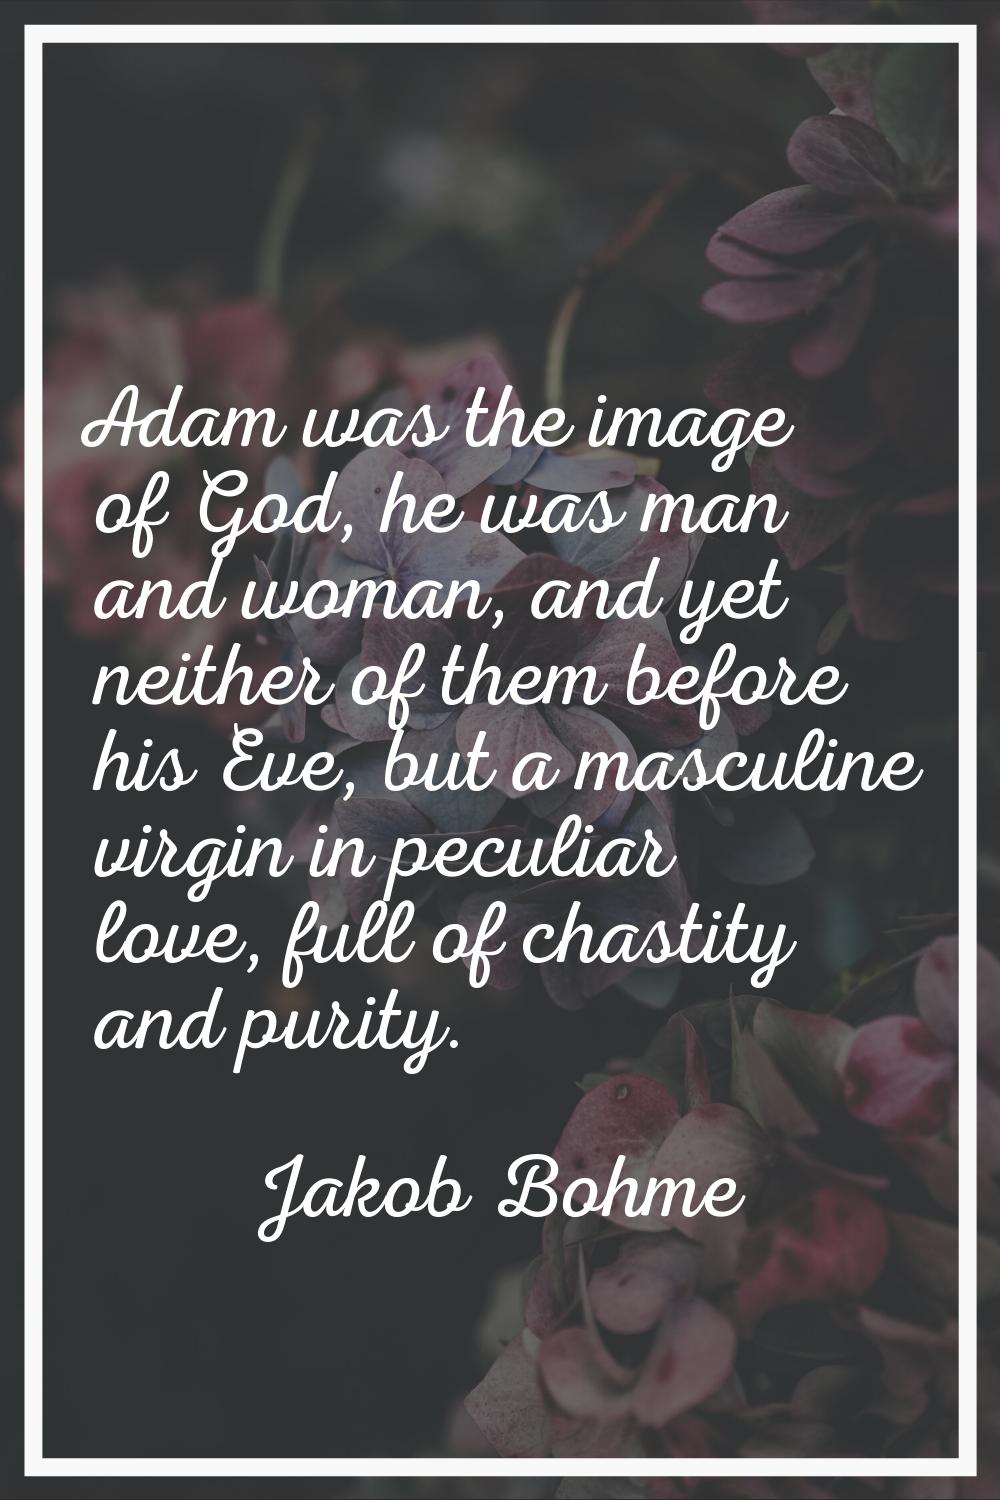 Adam was the image of God, he was man and woman, and yet neither of them before his Eve, but a masc